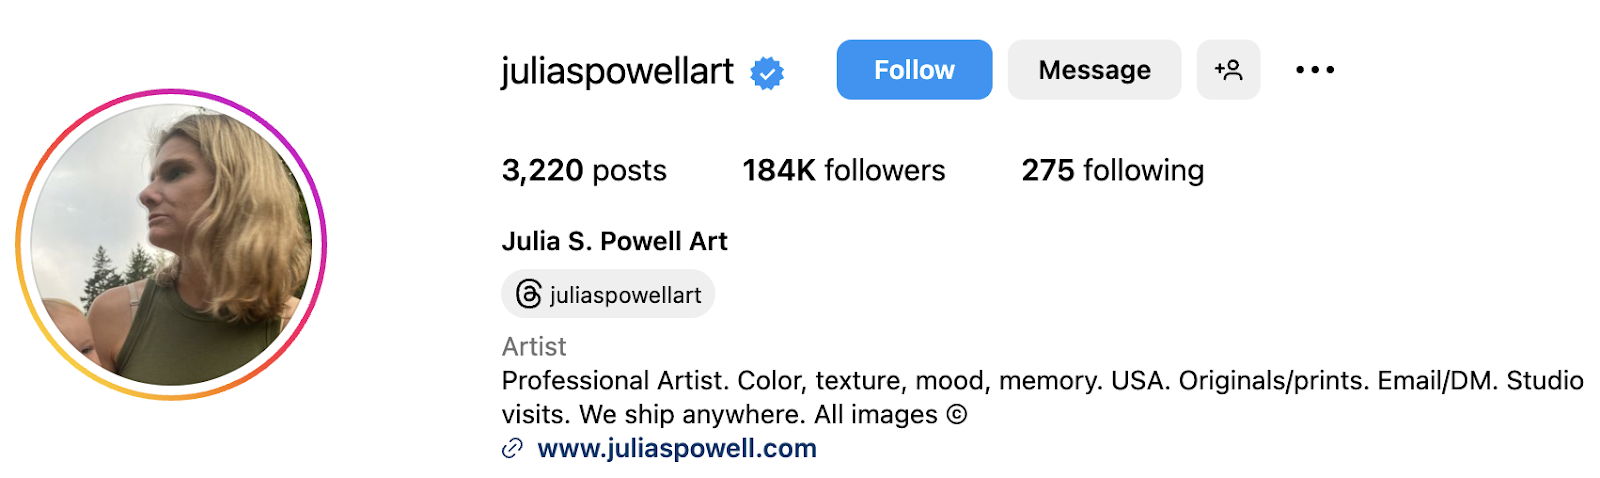 screenshot of the profile of julia powell, a famous artist on instagram